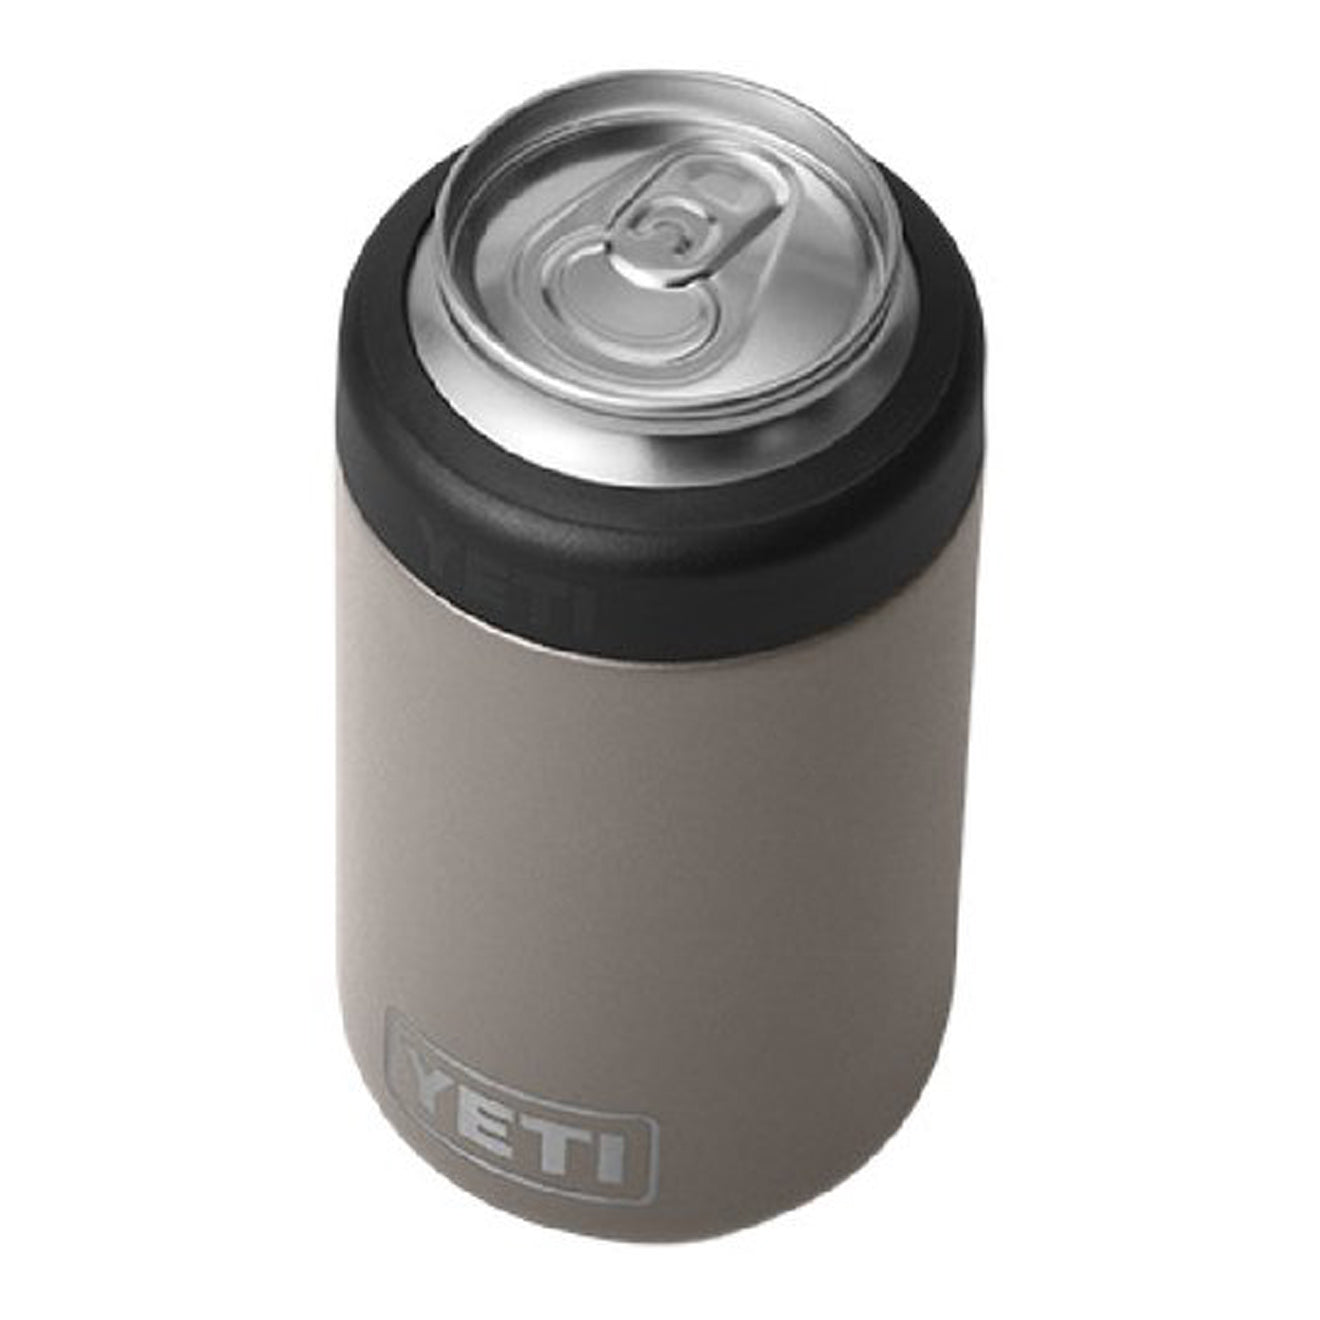 Yeti Colster 12 oz Slim Can Cooler - Sharptail Taupe